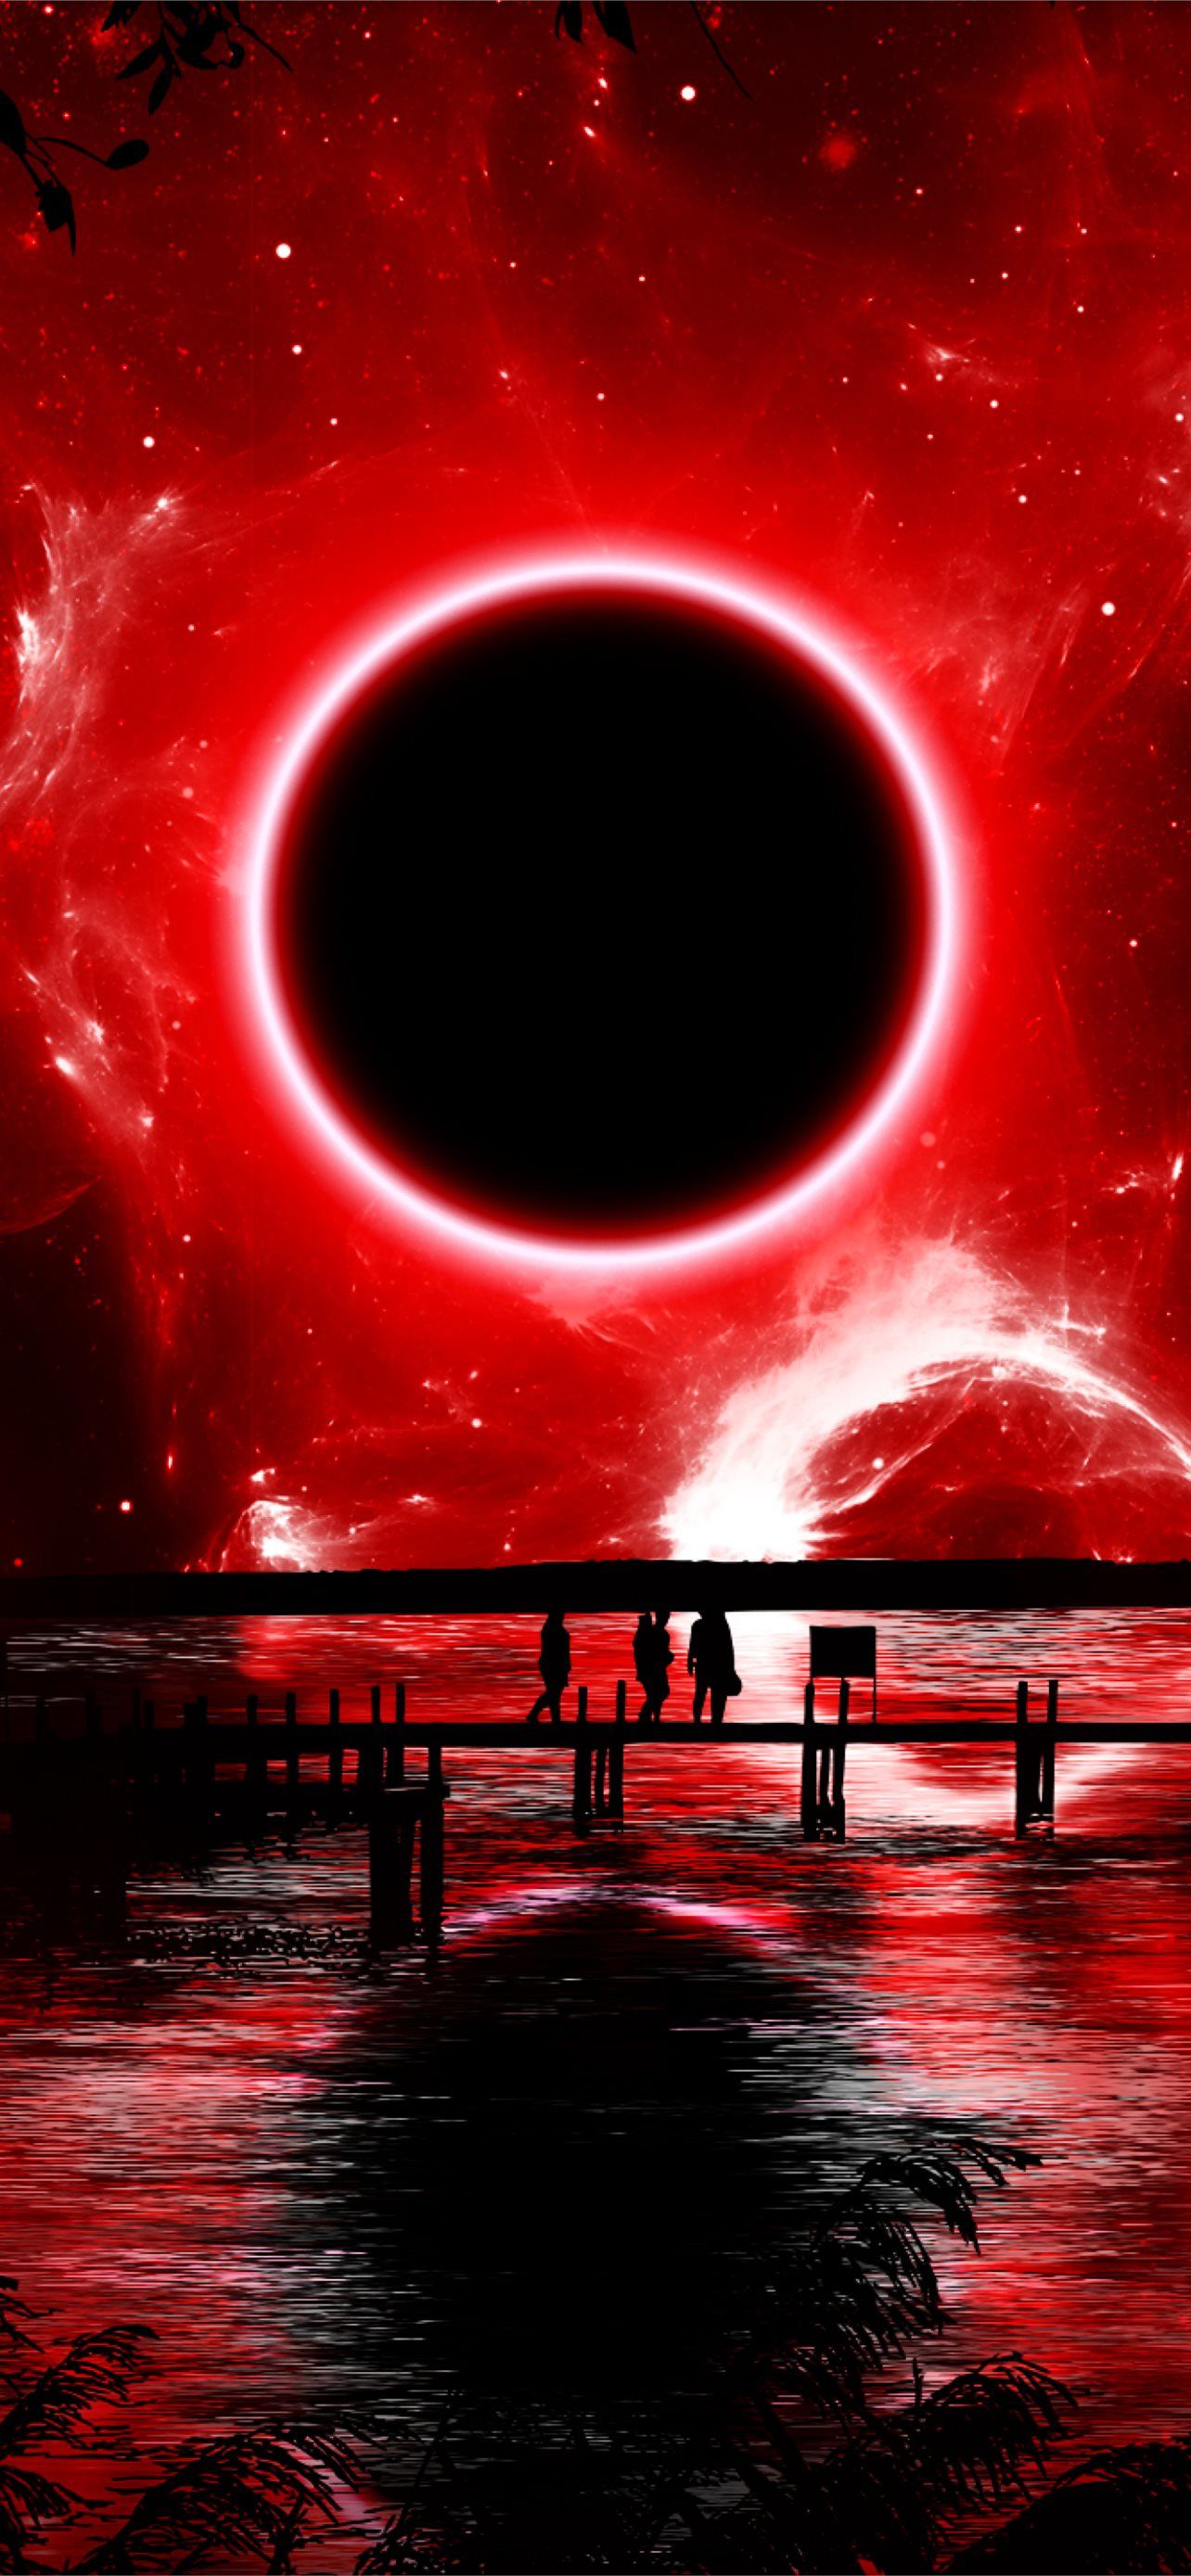 Red Eclipse Digital Art Resolution HD Space 4K Ima. iPhone Wallpaper Free Download